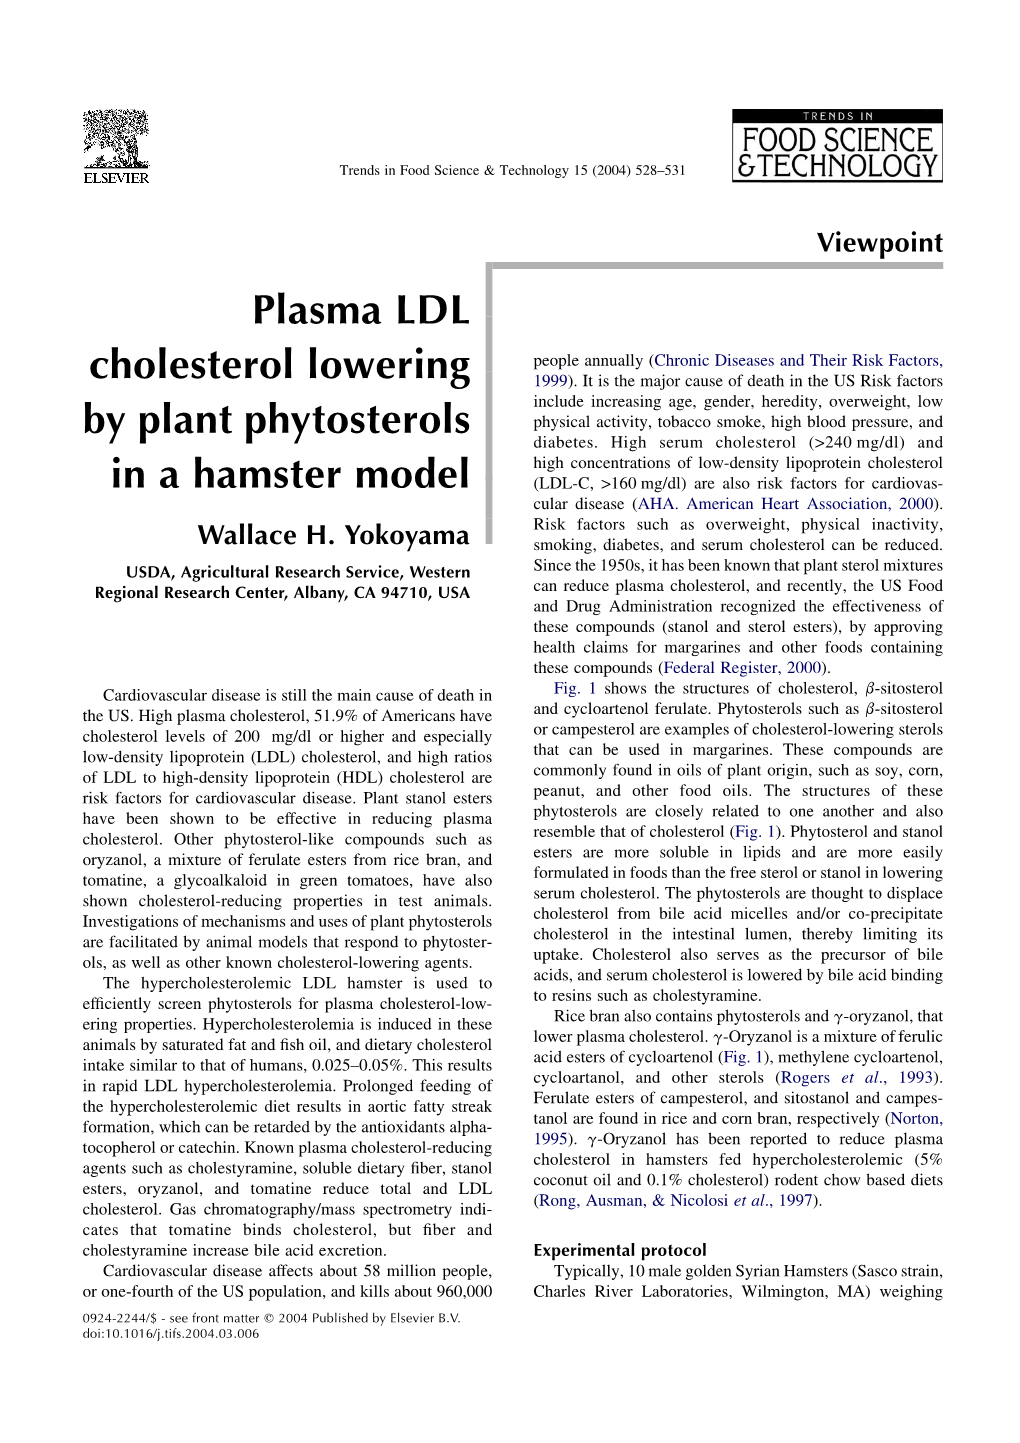 Plasma LDL Cholesterol Lowering by Plant Phytosterols in a Hamster Model